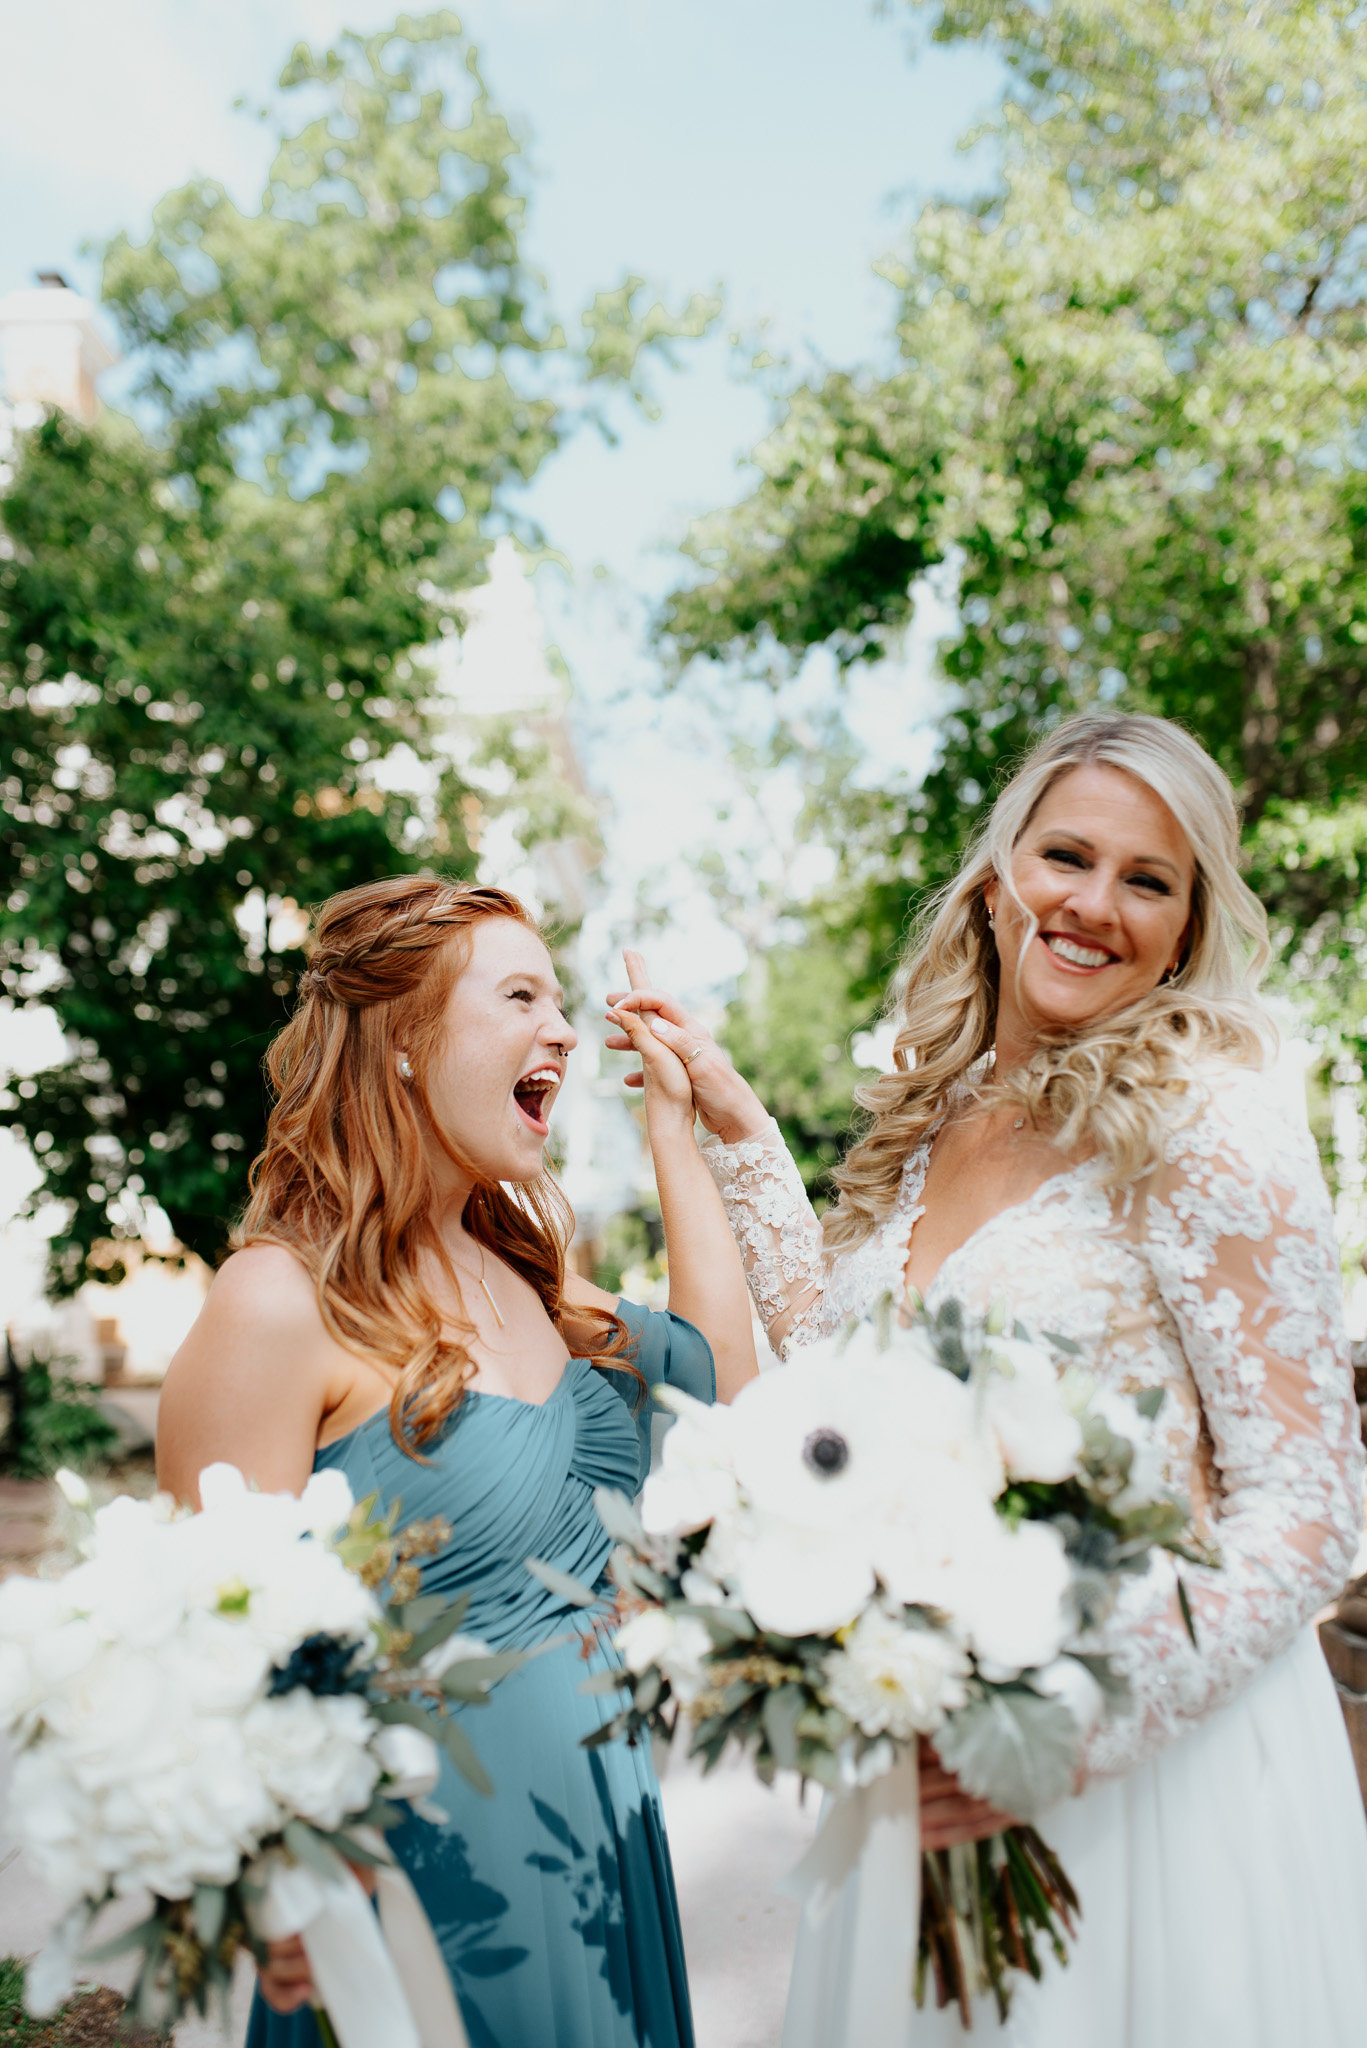 Great photo of bride and bridesmaid dancing and laughing together at grant humphrey's mansion.